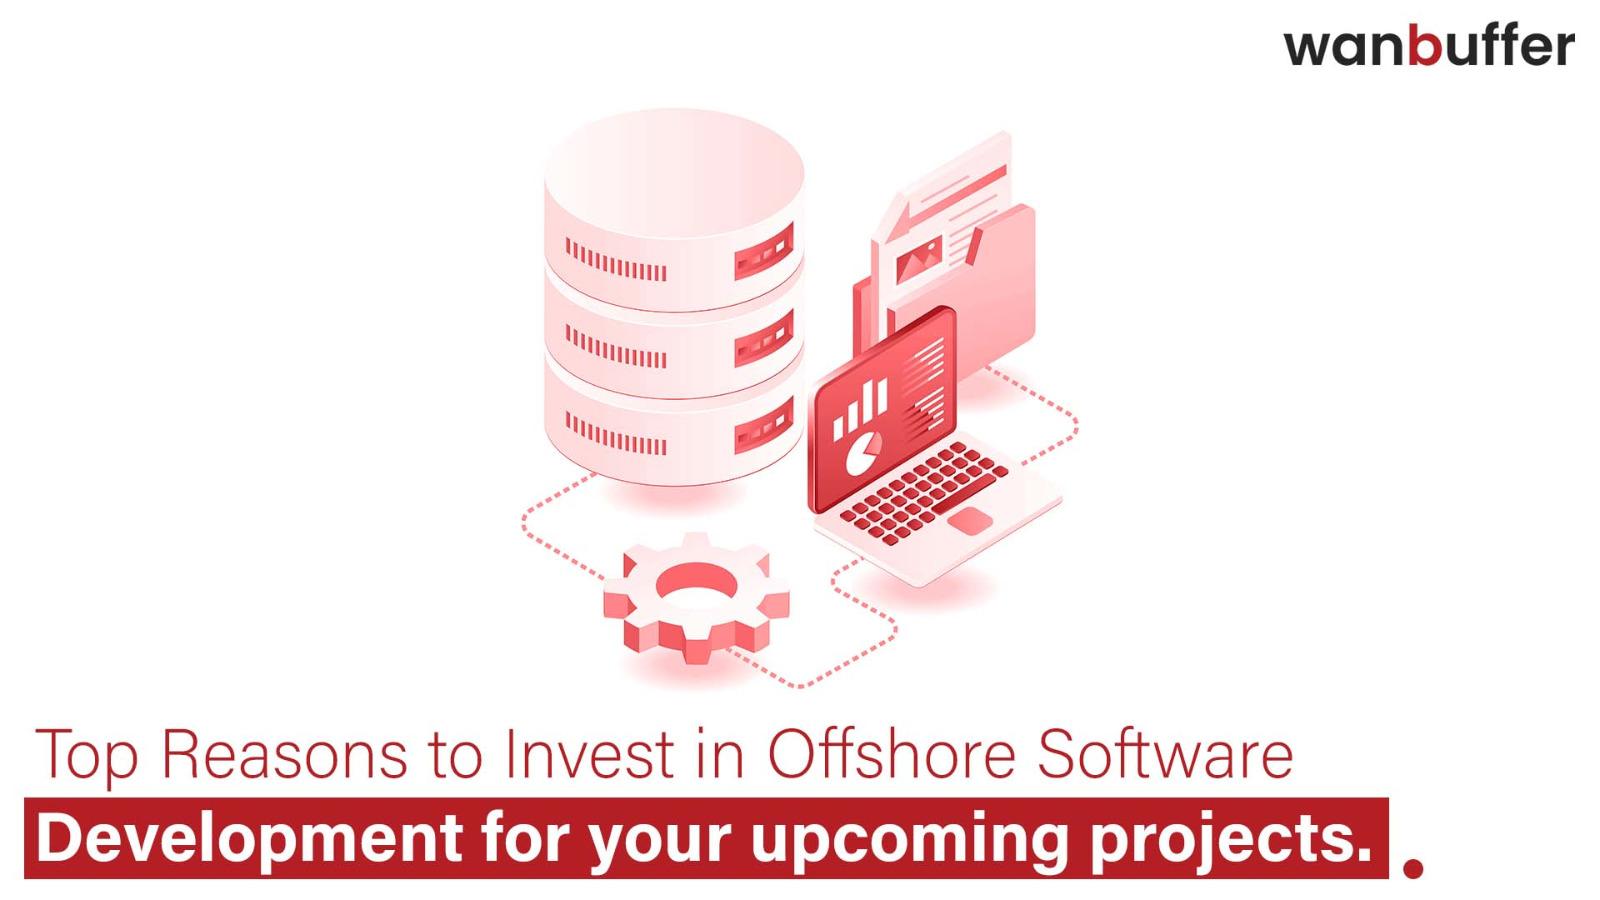 Why Offshore Software Development Makes Sense for Your Next Project